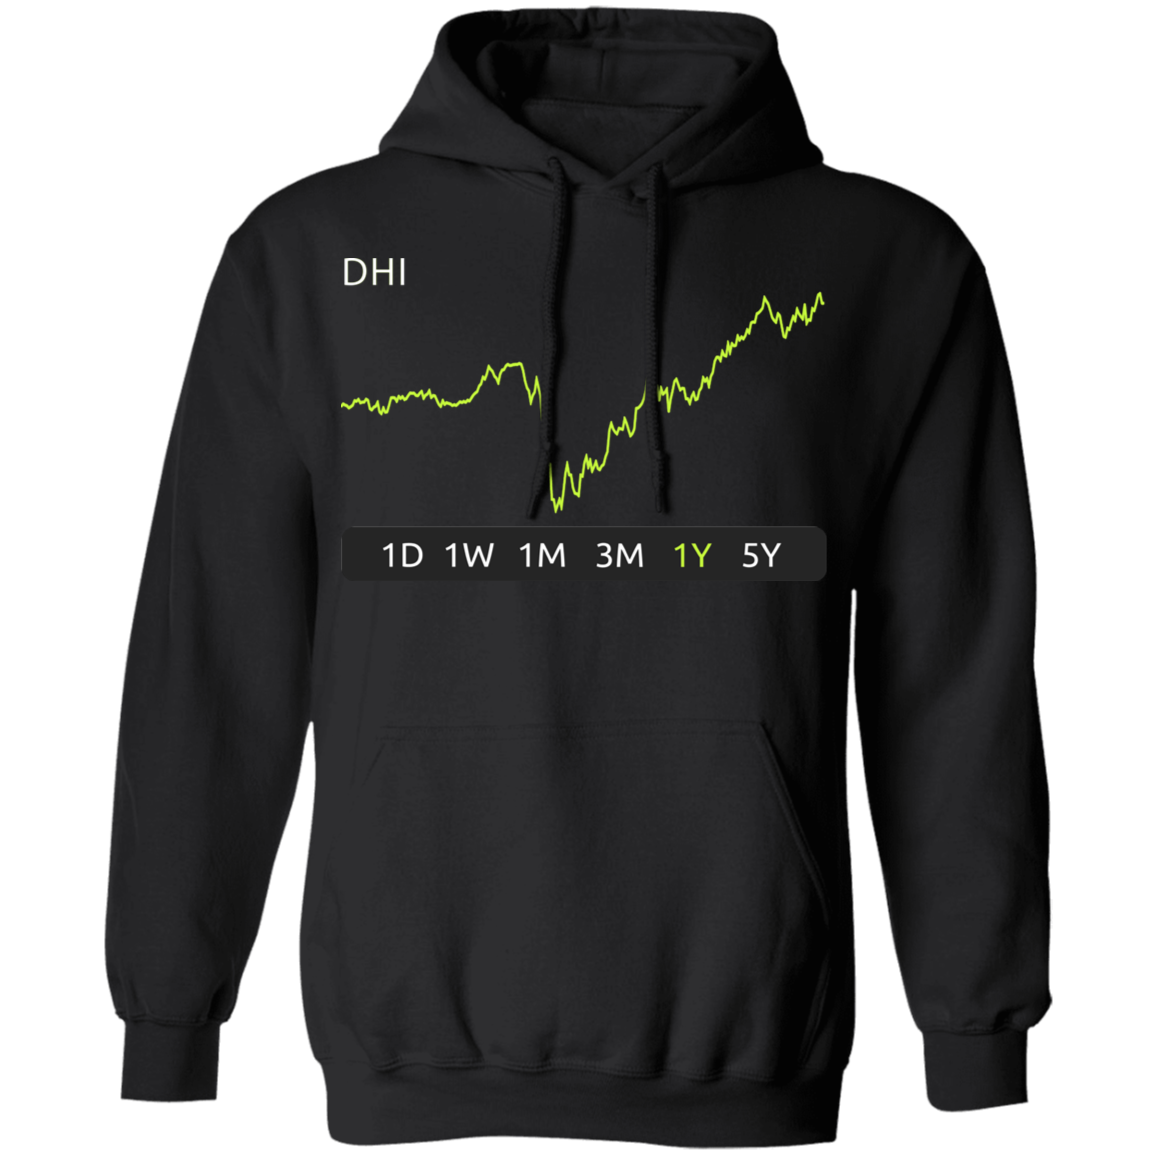 DHI Stock 1y Pullover Hoodie